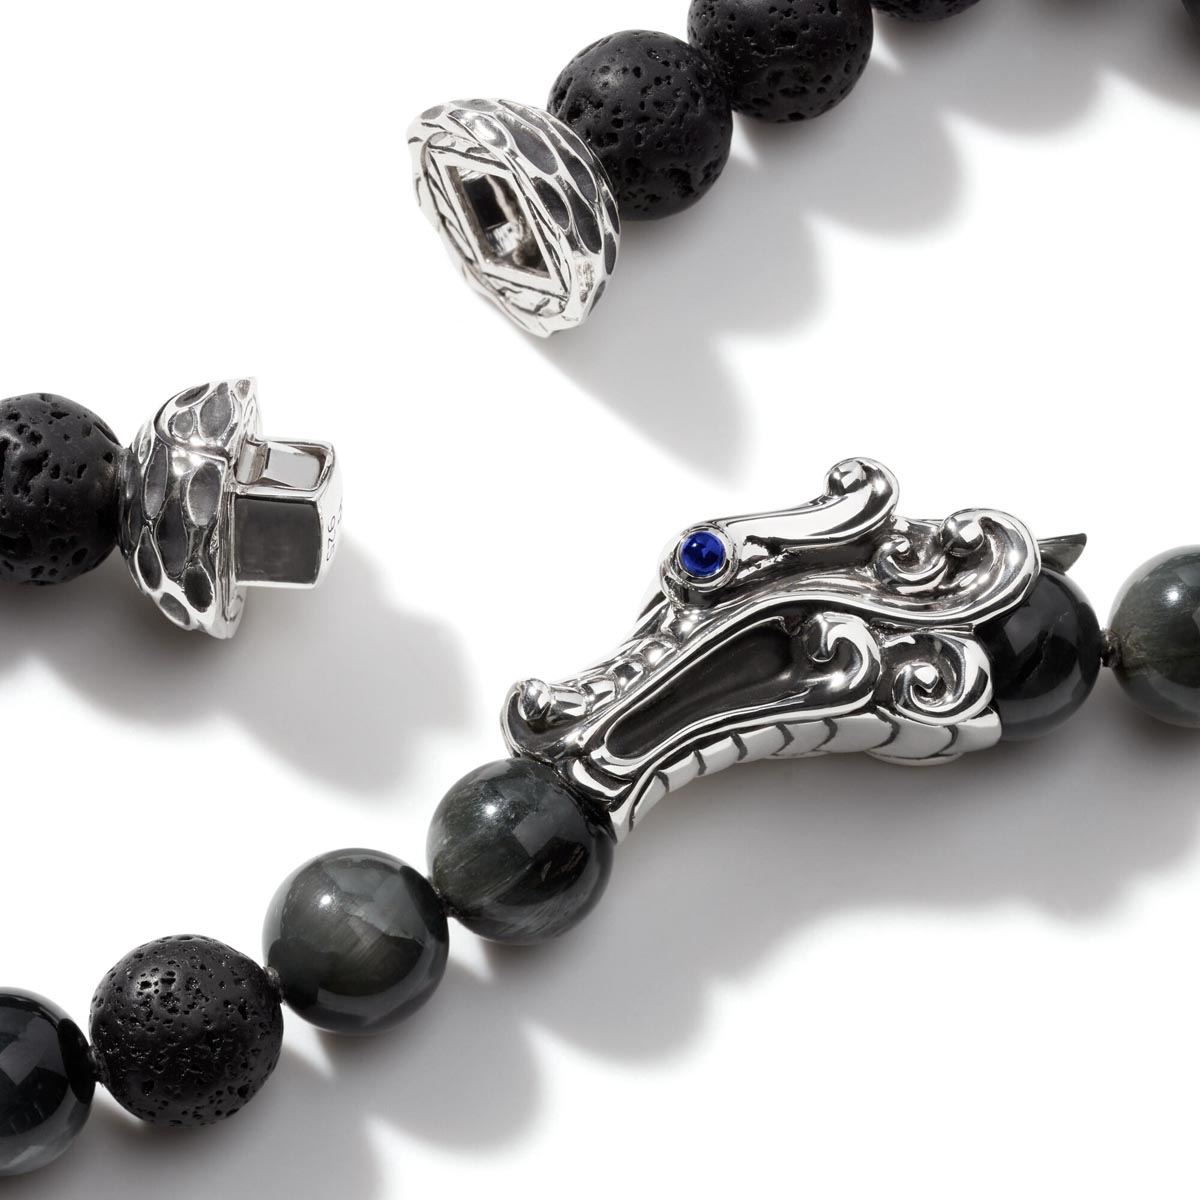 John Hardy Legends Naga Mens Obsidian Lava Rock and Eagle Eye Bead Bracelet in Sterling Silver with Sapphires